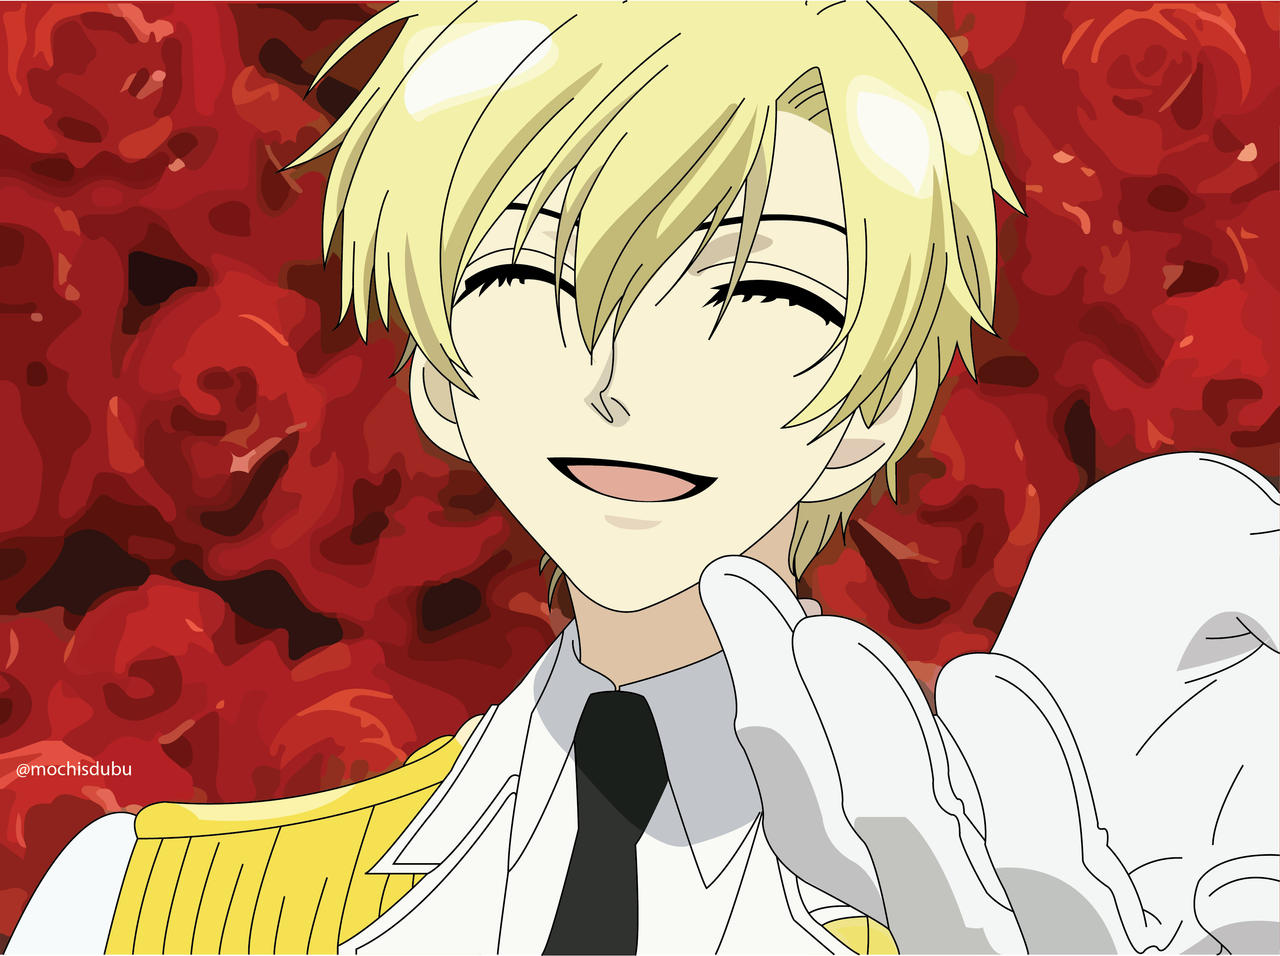 5. "Tamaki Suoh" from Ouran High School Host Club - wide 6